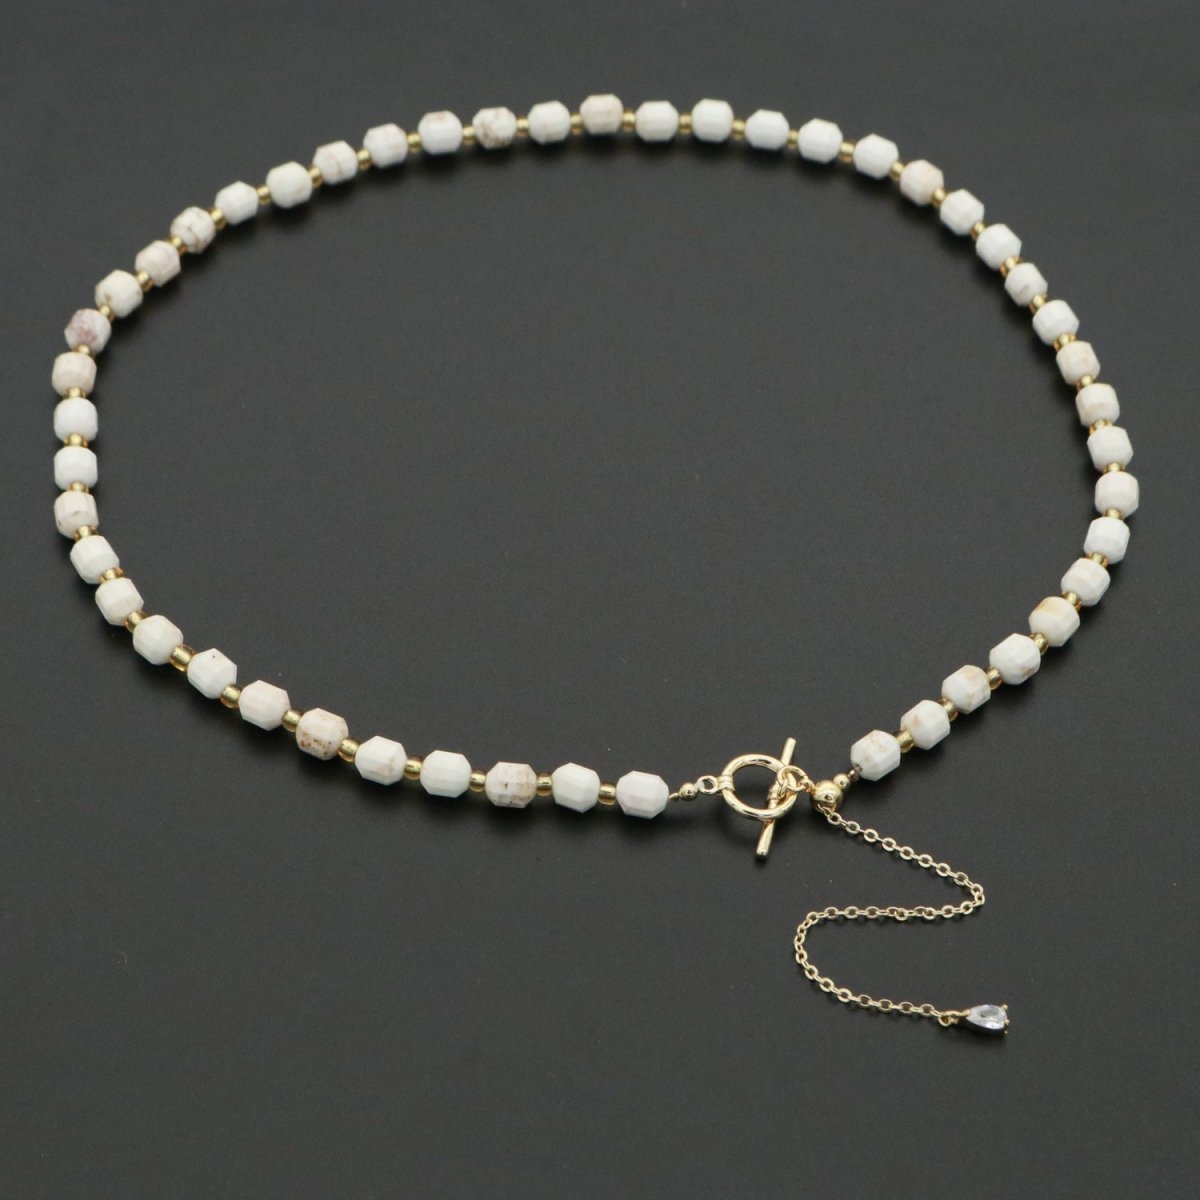 OS 5.5mm White Howlite Natural Gemstone Bead 16.5 Inch Choker Necklace w. Toggle Clasps | WA-254 Clearance Pricing - DLUXCA